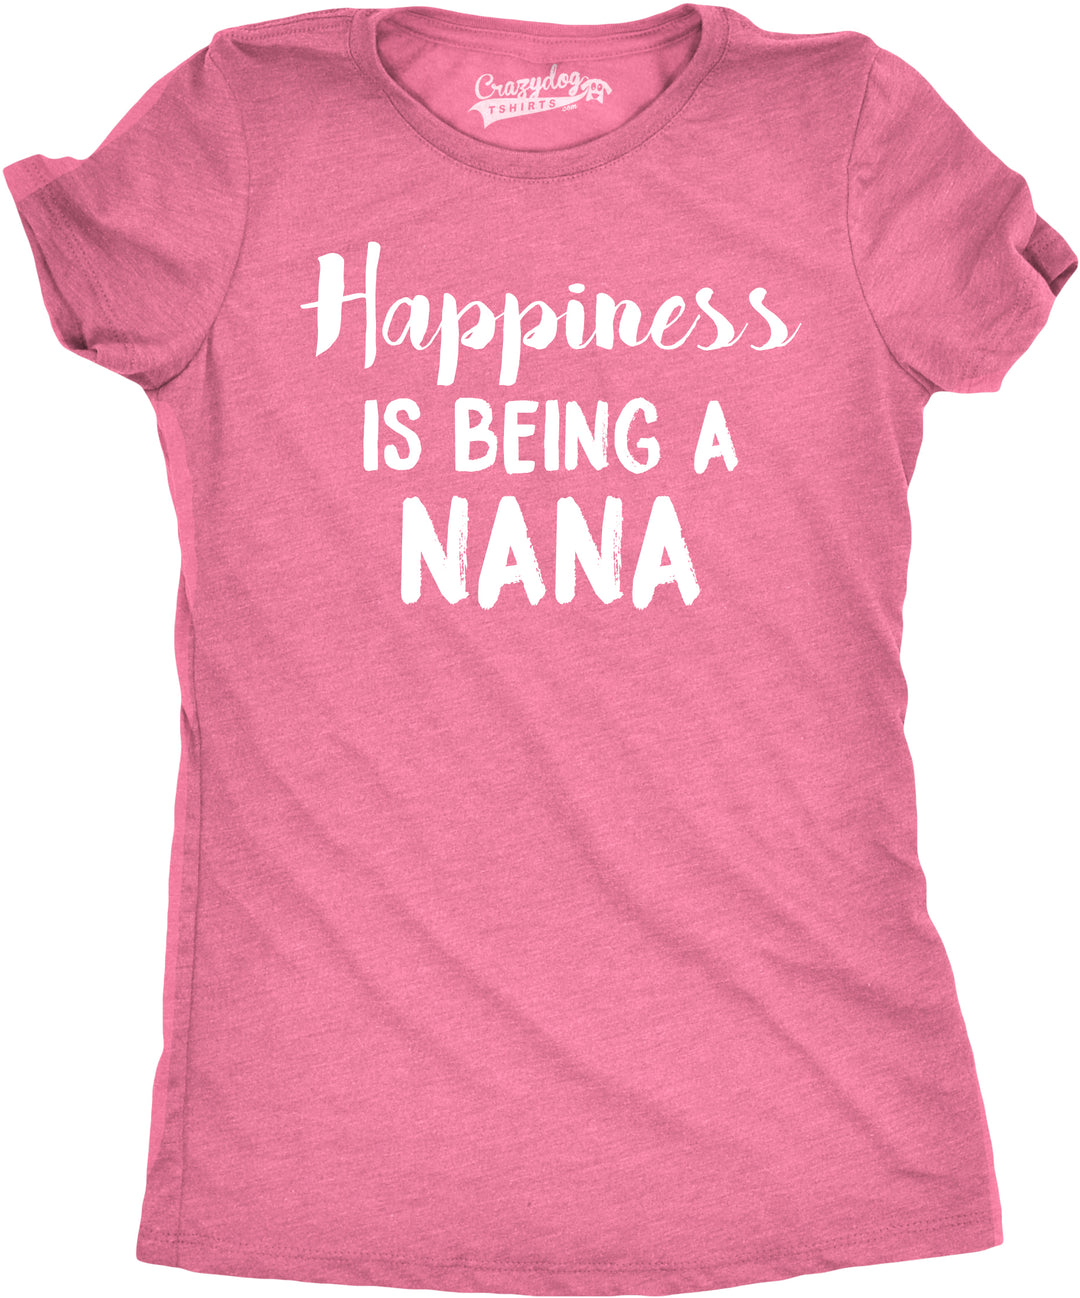 Funny Heather Pink Happiness Is Being A Nana Womens T Shirt Nerdy Mother's Day Grandmother Tee